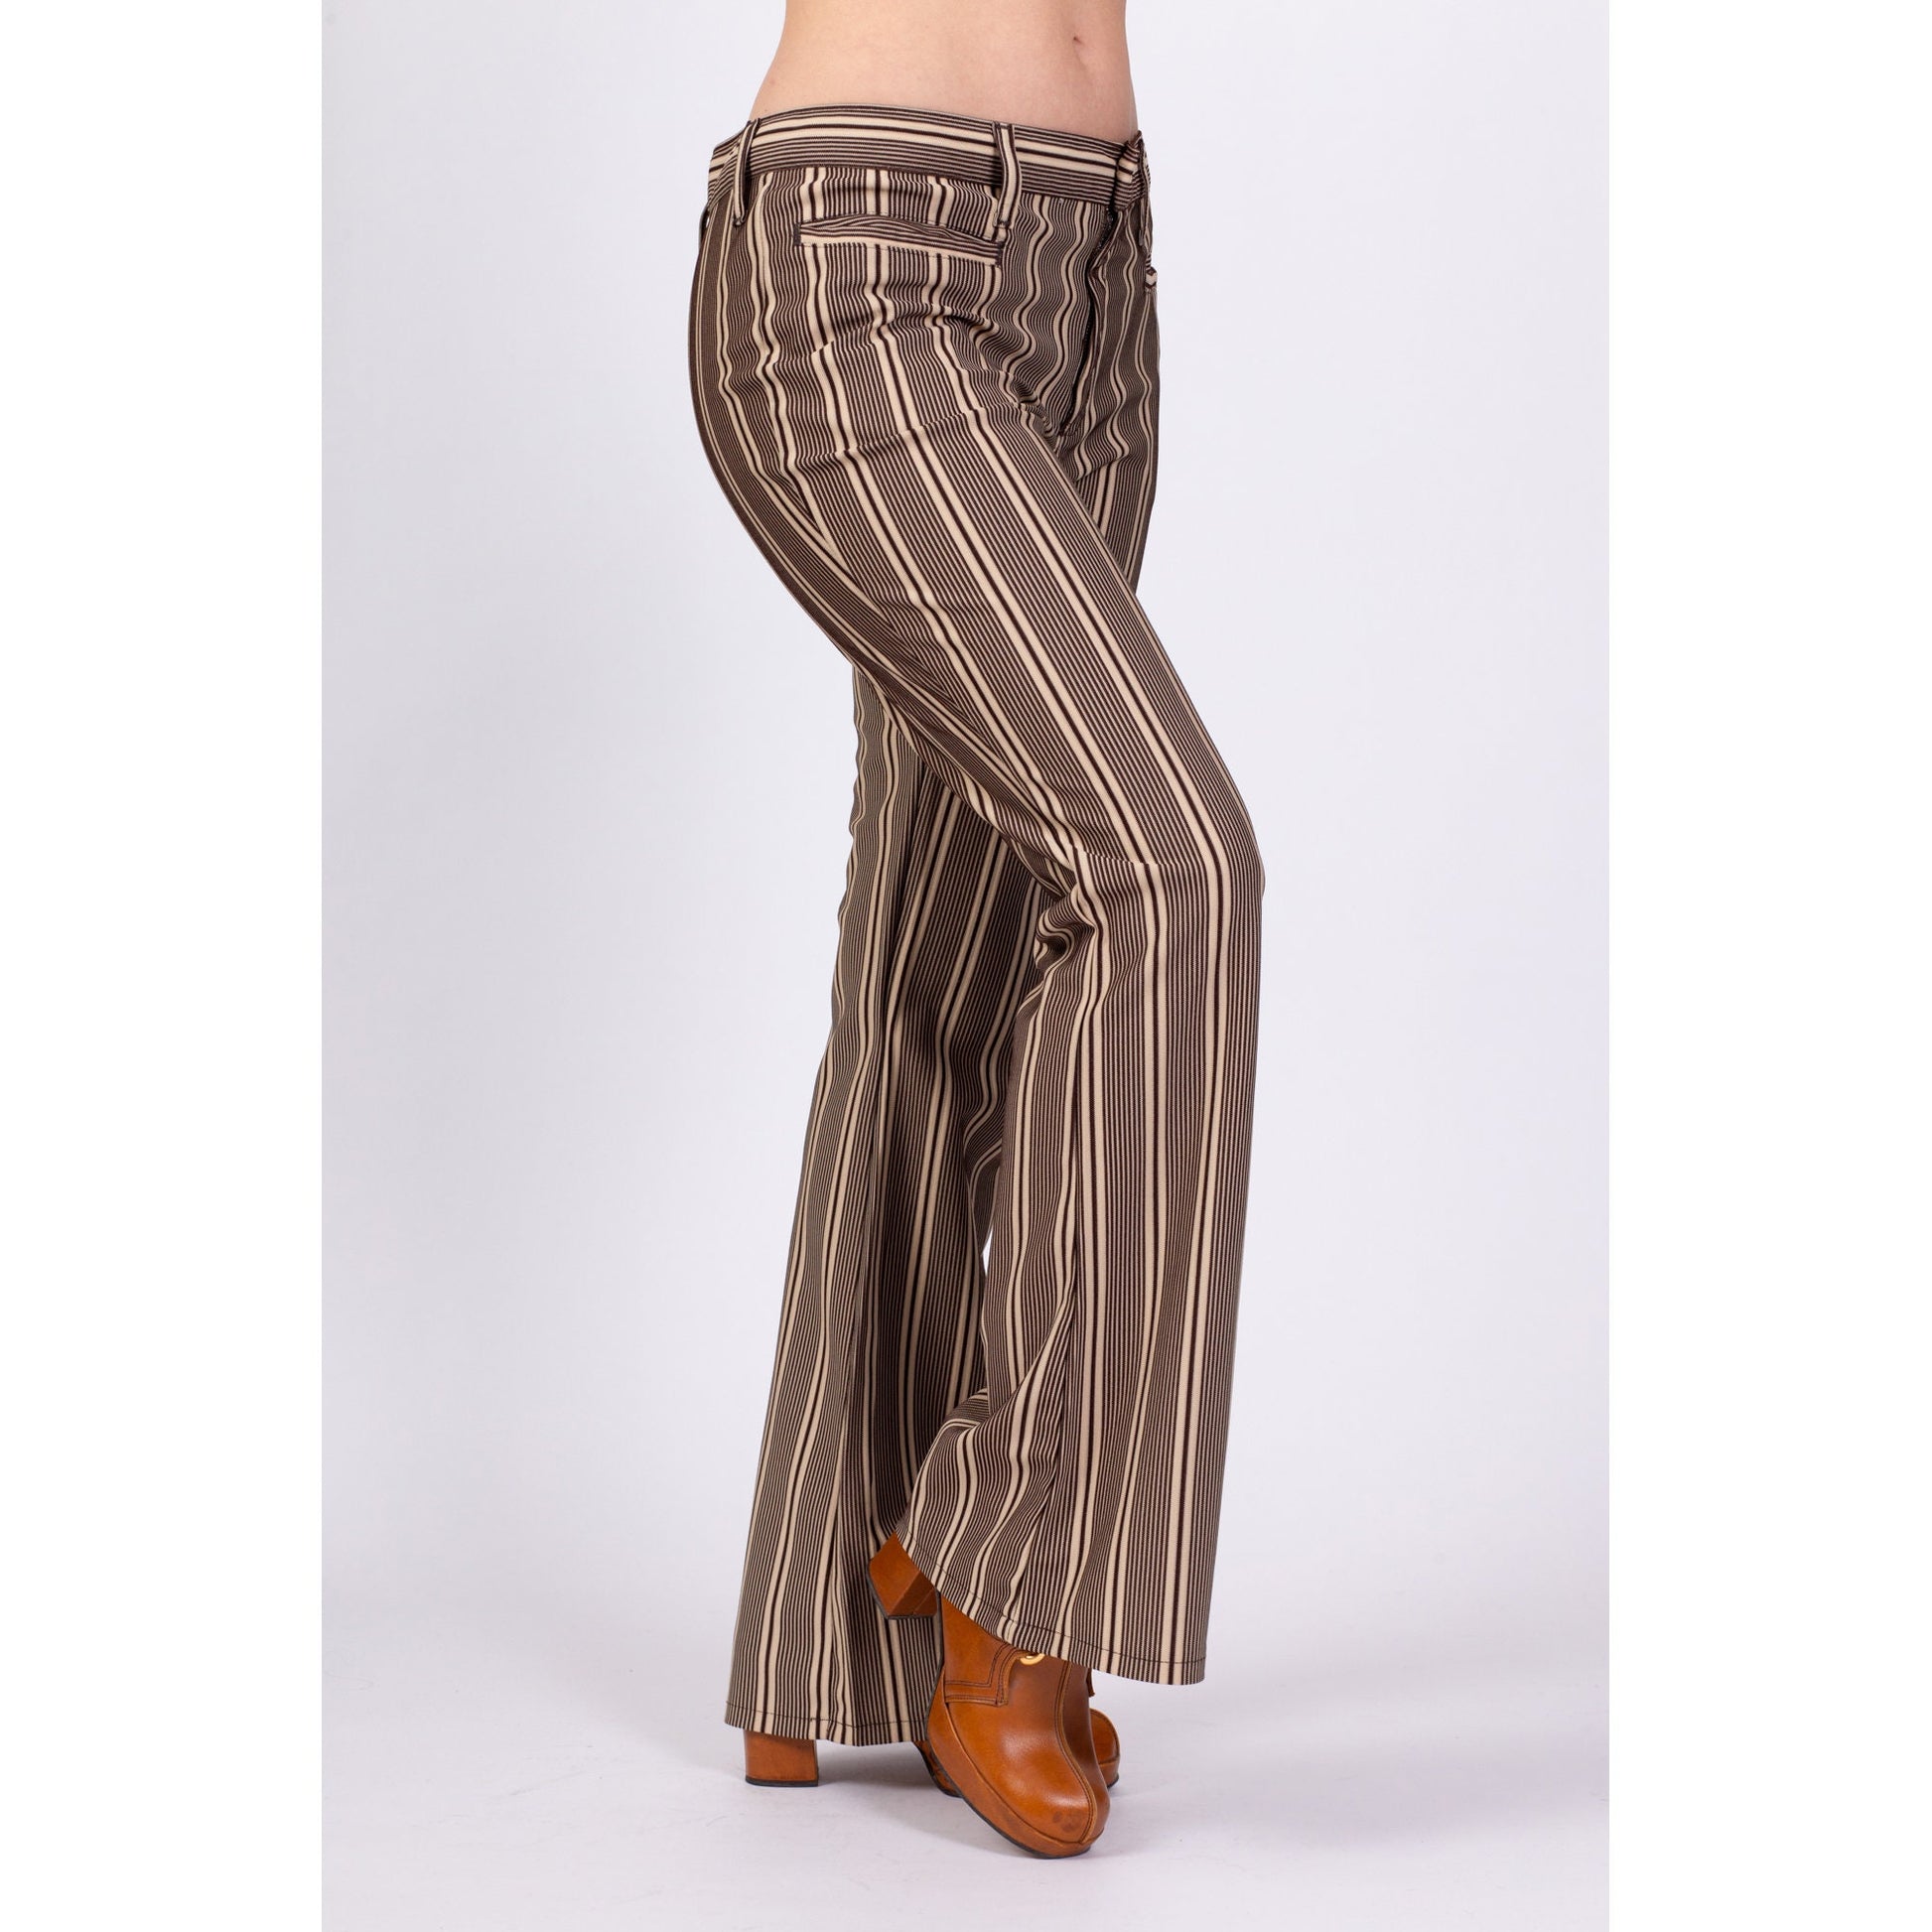 70s Brown & White Striped Bell Bottoms - Medium to Large – Flying